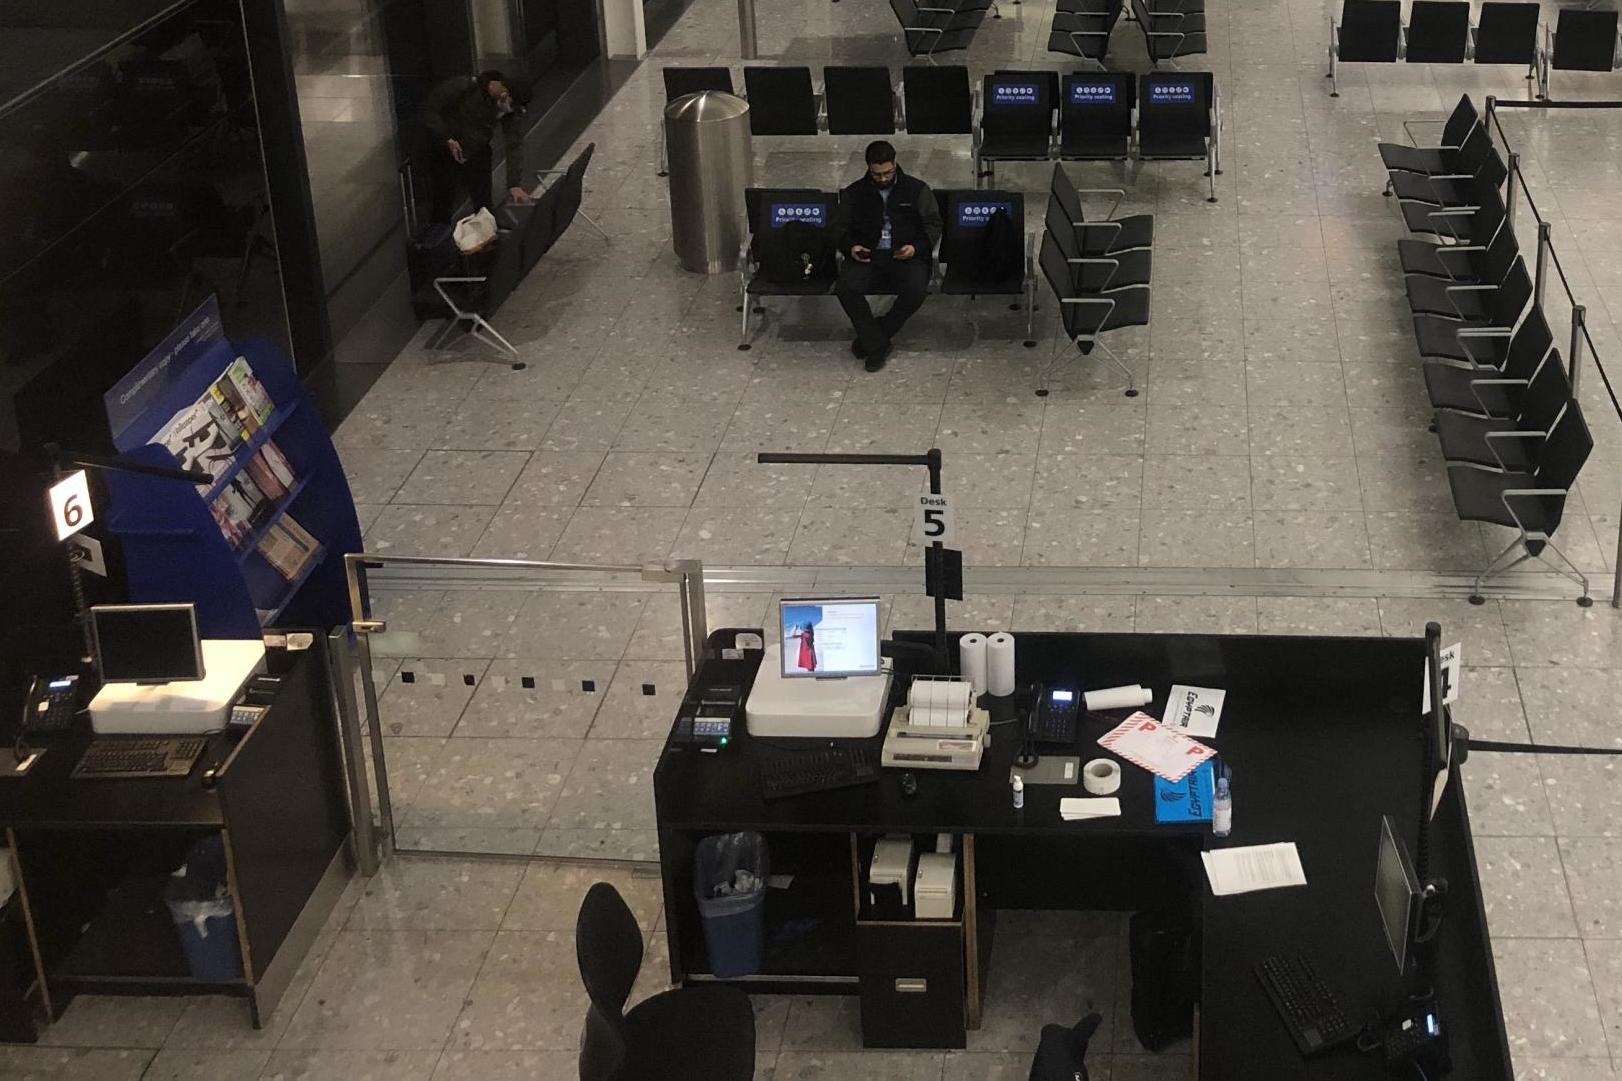 Flying solo: a departure gate at Heathrow Terminal 2 in March 2020